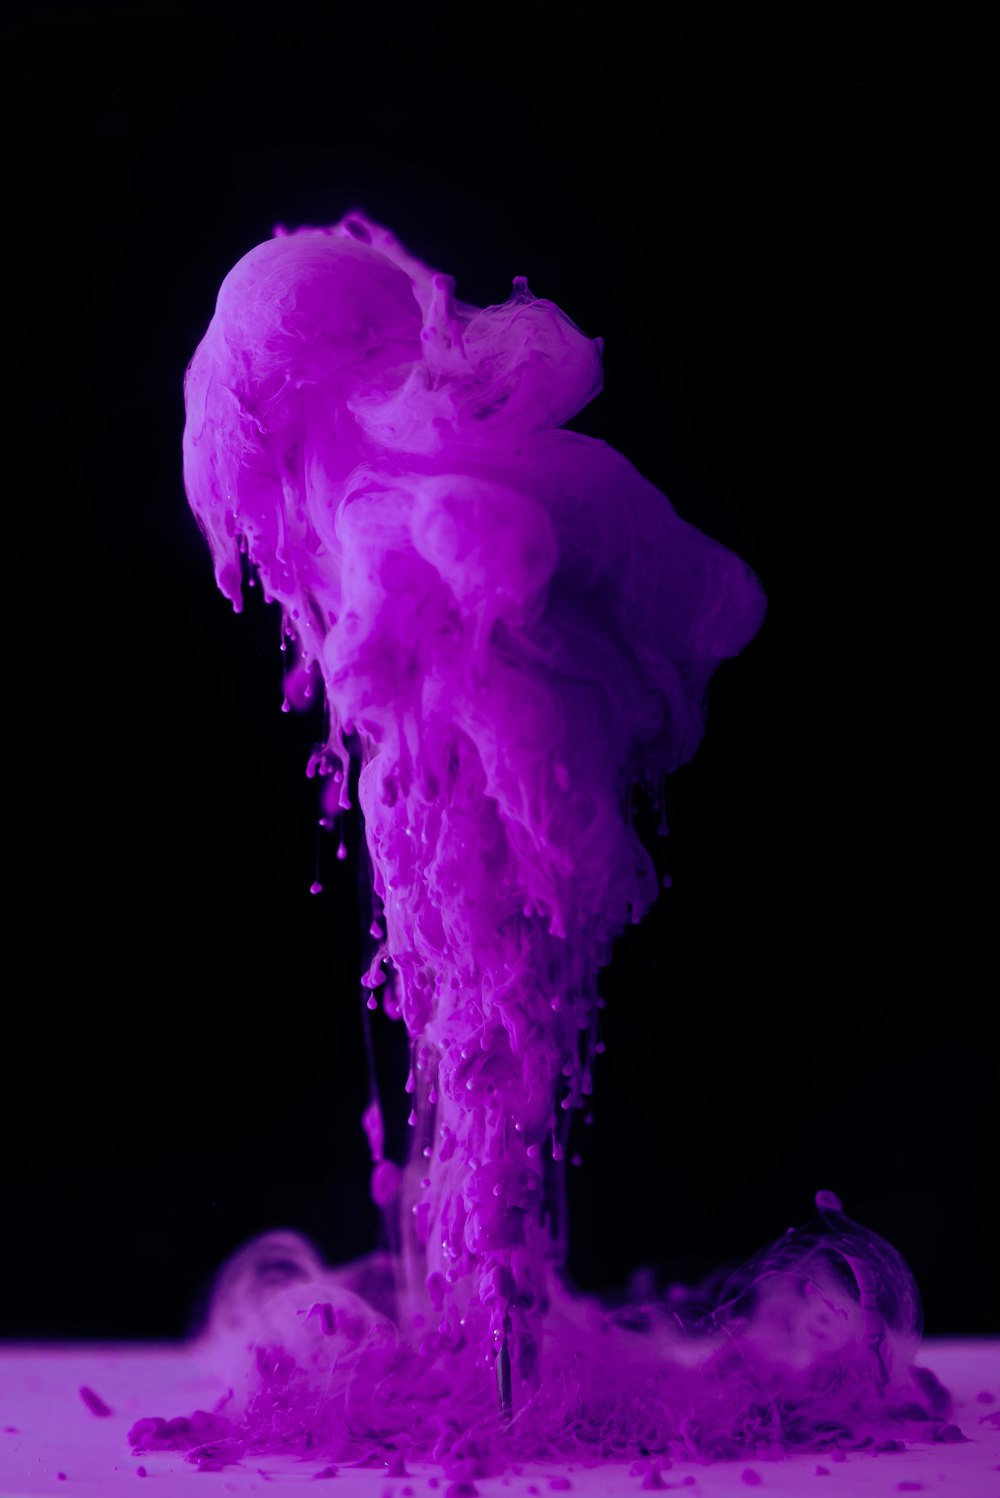 Purple Smoke Pictures | Download Free Images on Unsplash